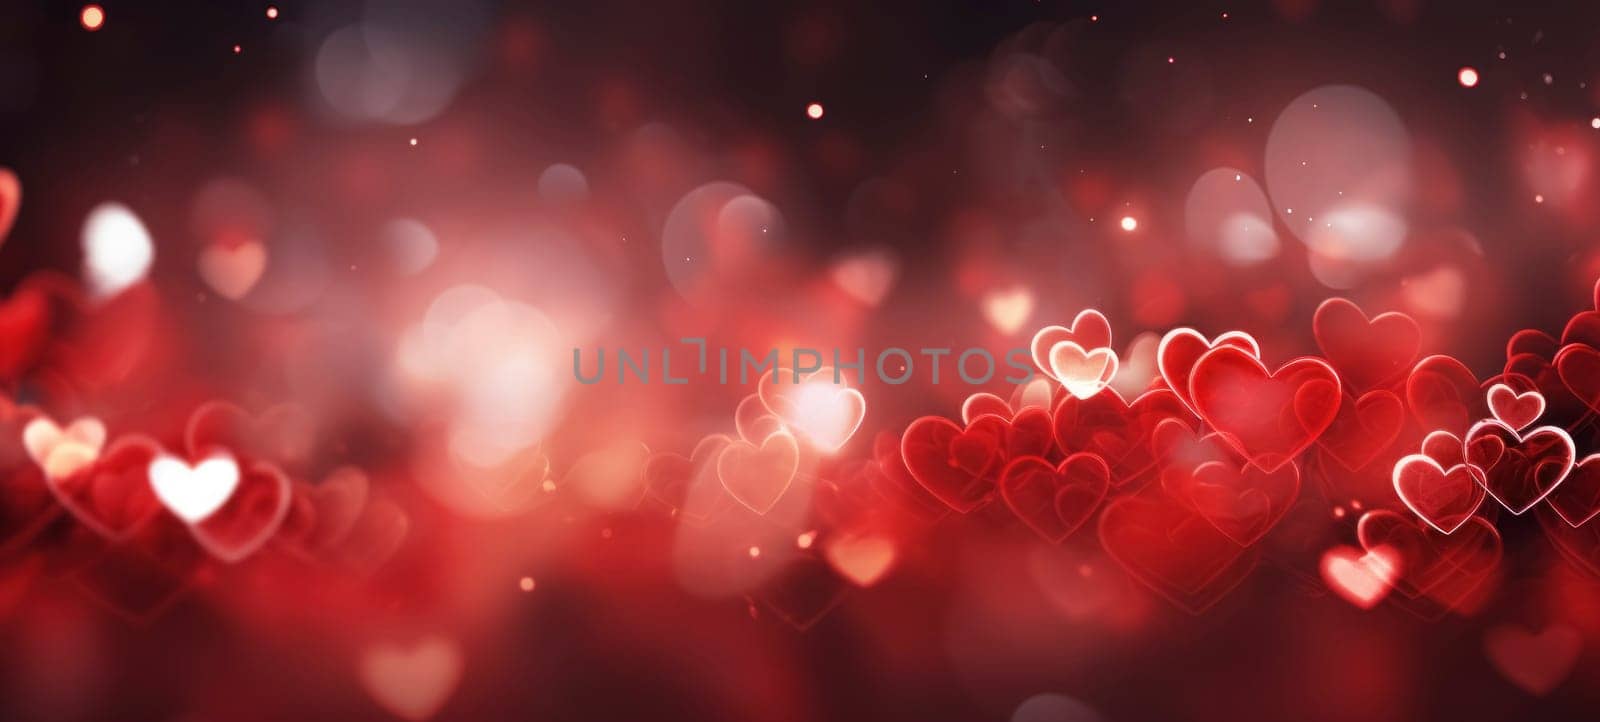 Romantic red hearts bokeh background, perfect for Valentine's Day or love-themed designs.